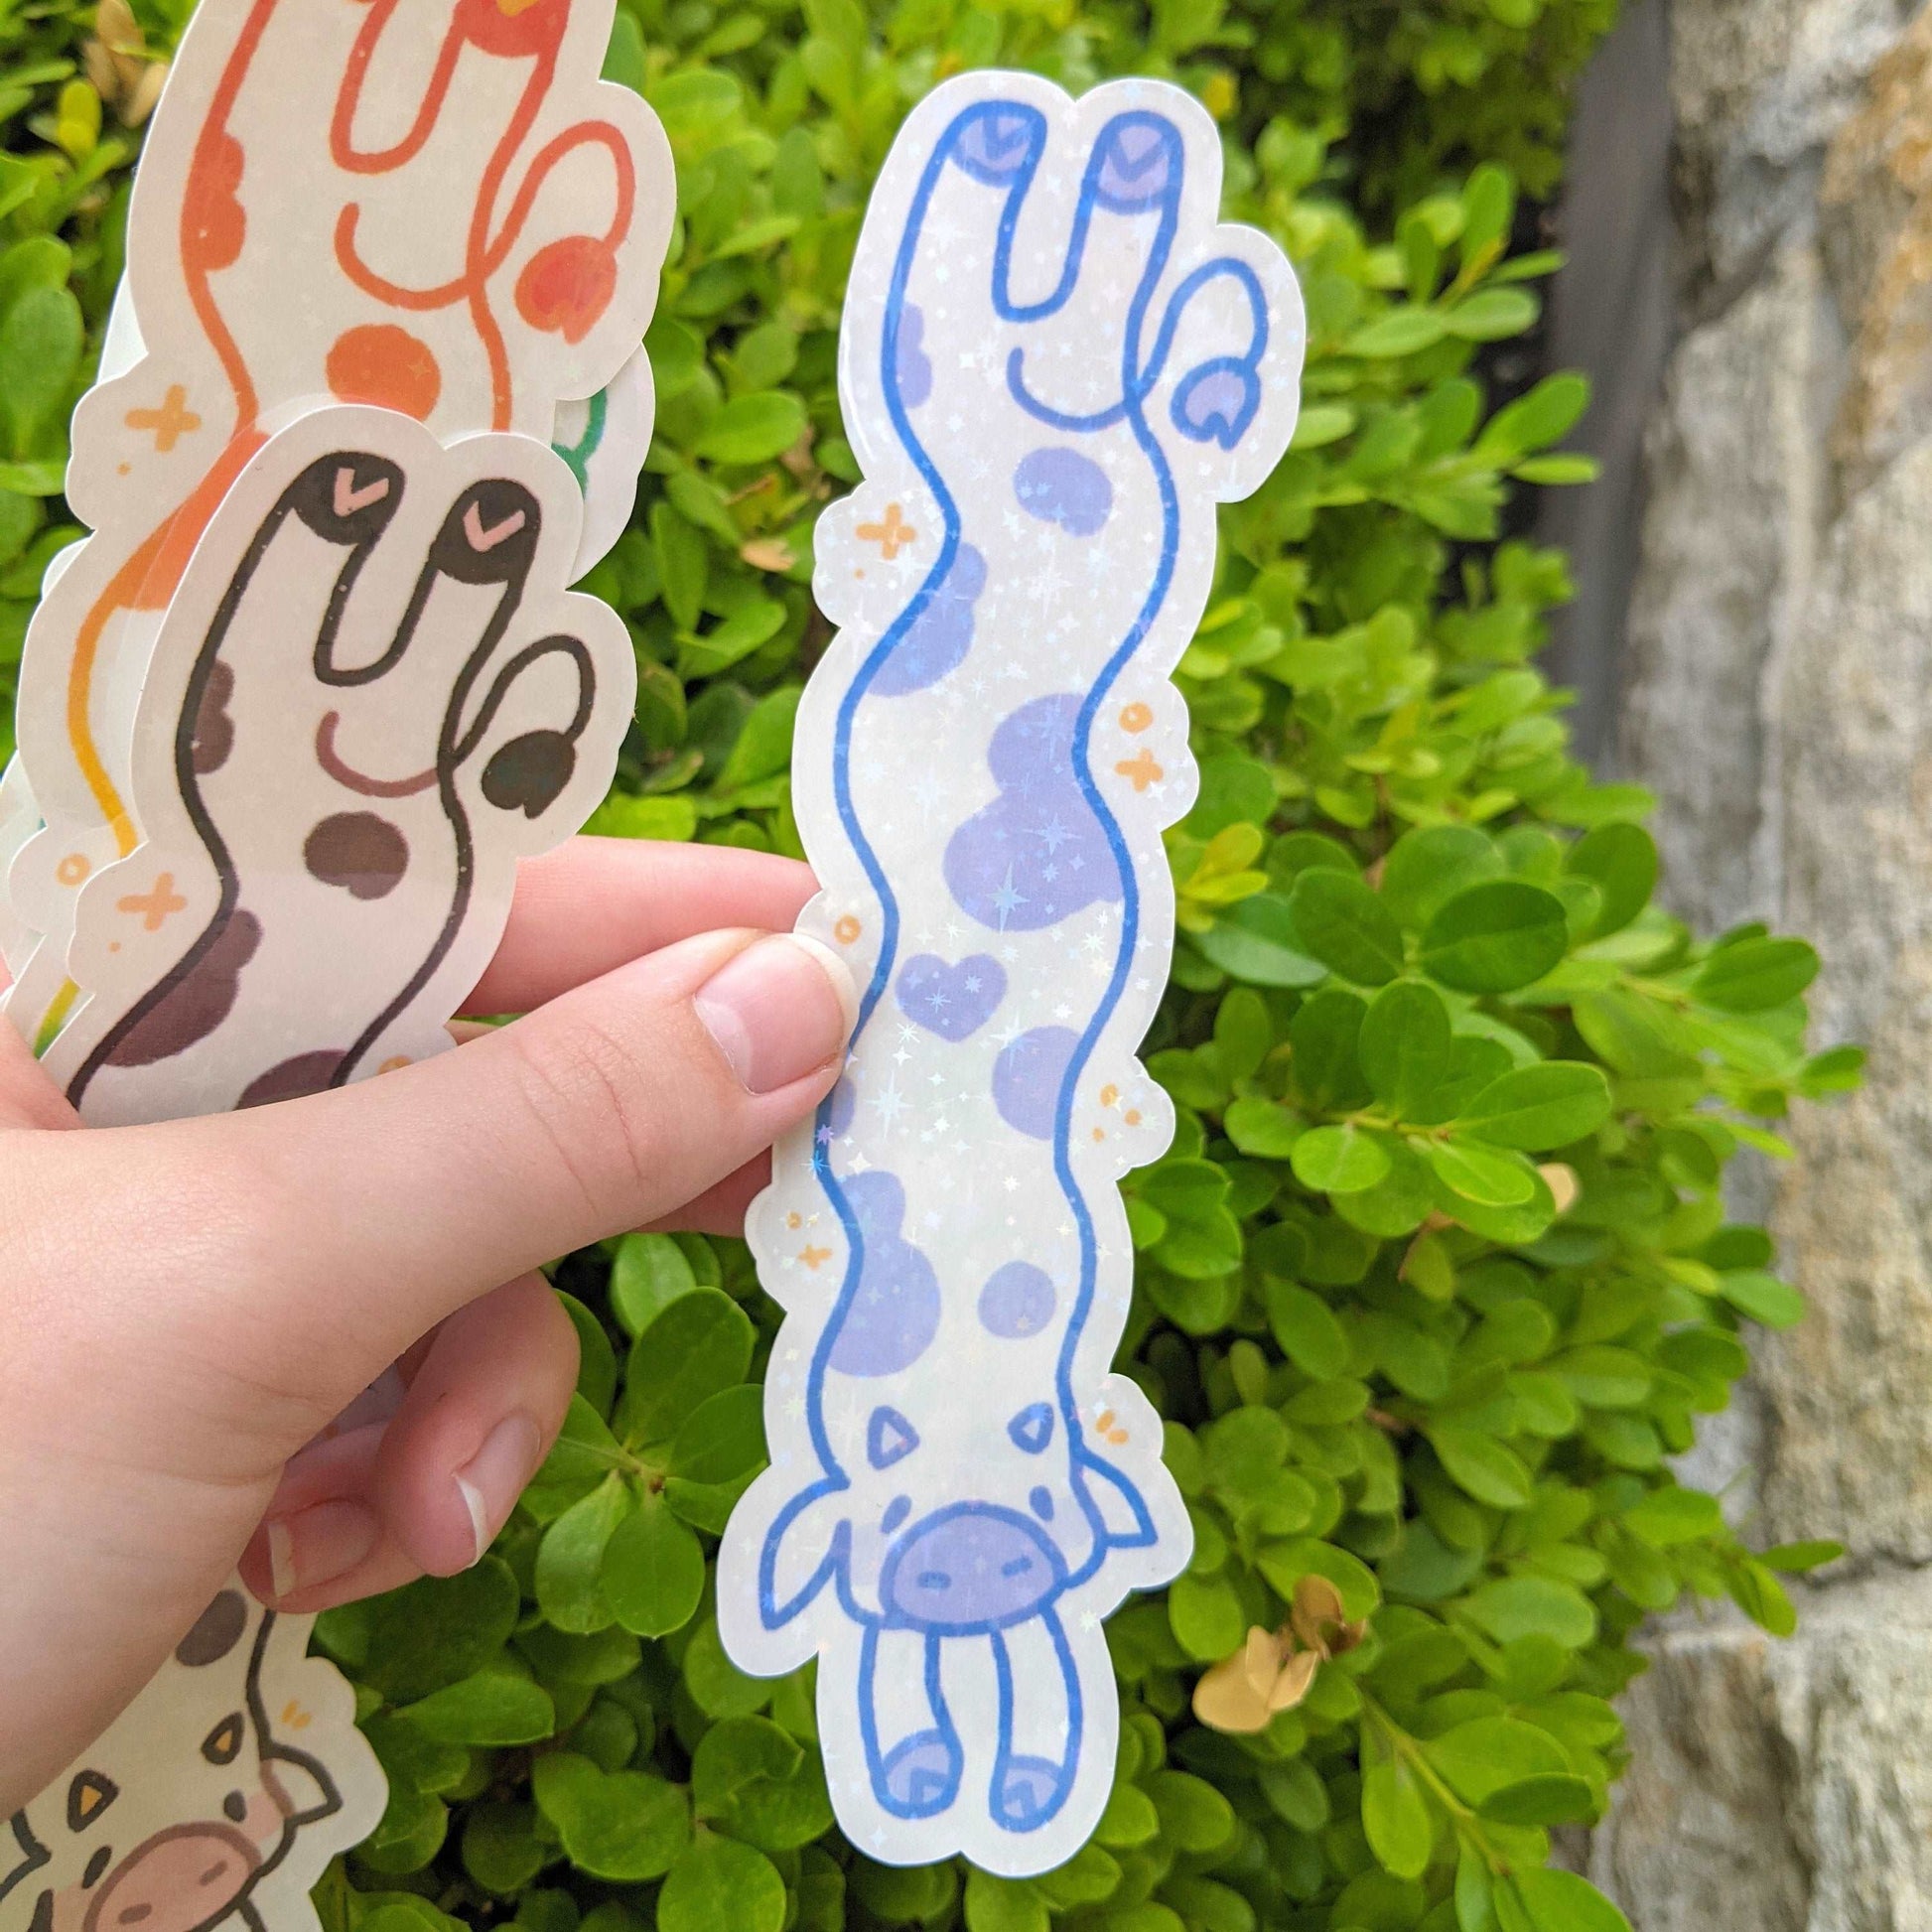 MORE Sparkly Long Cow Stickers!